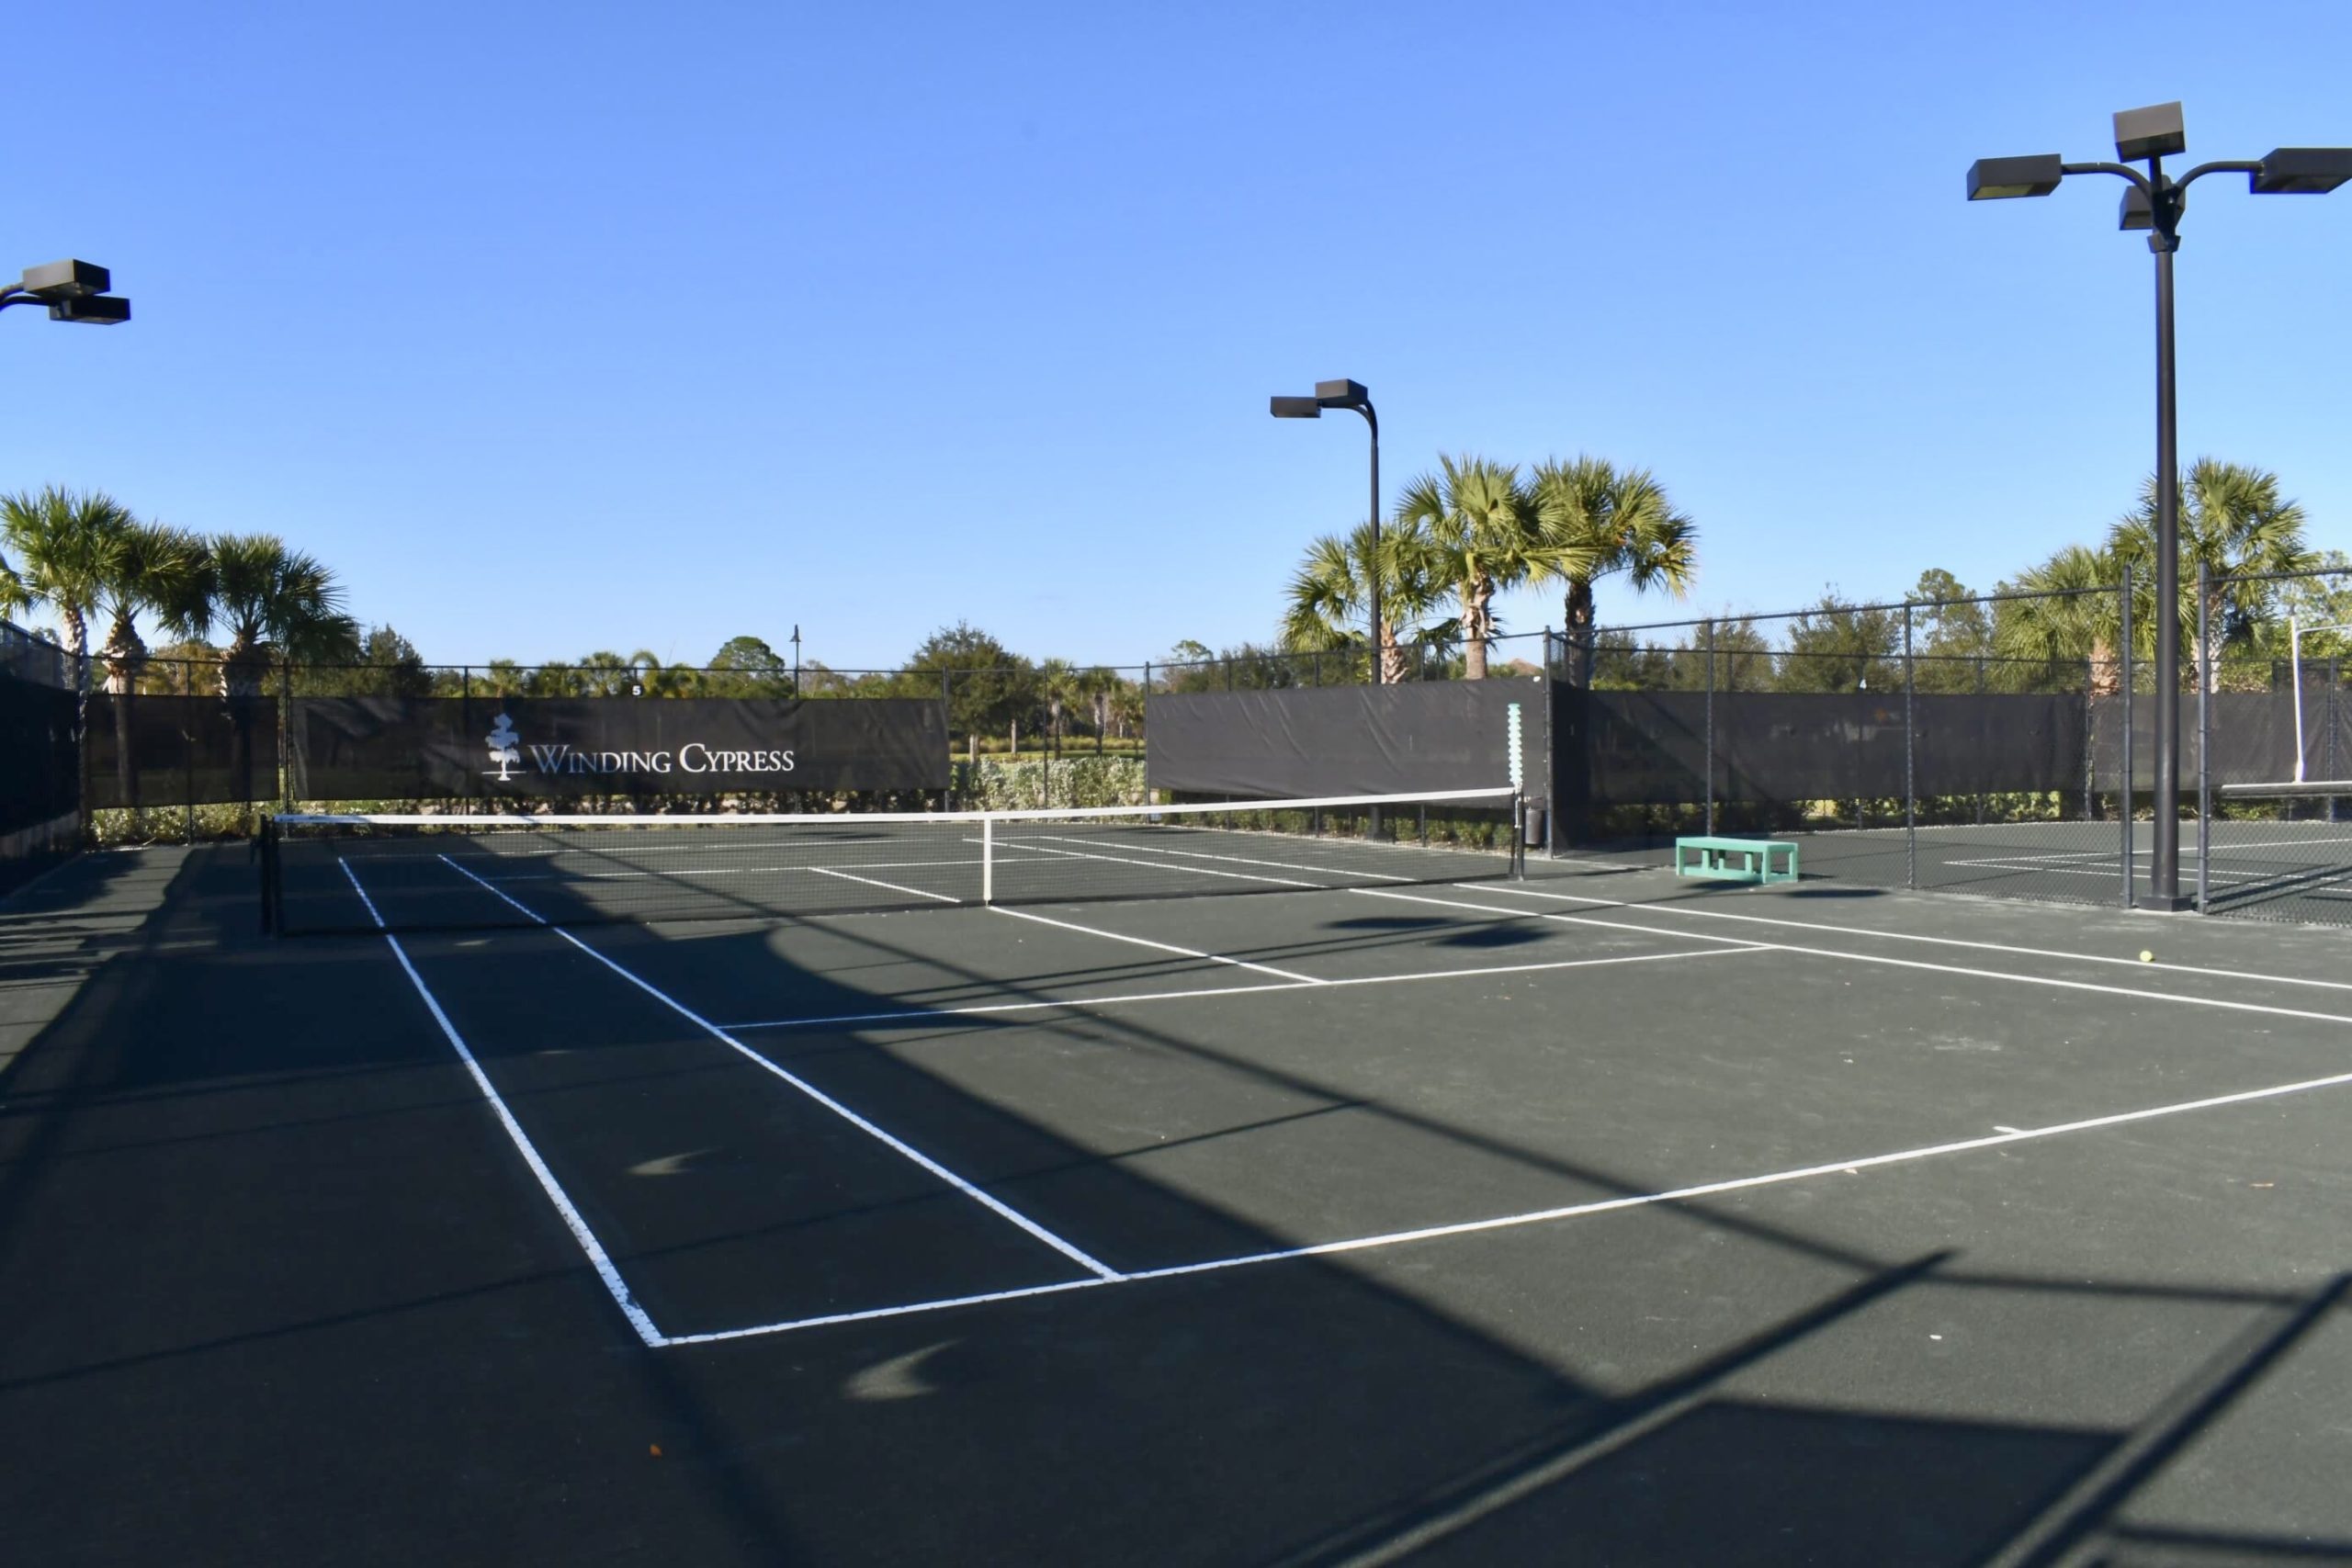 There are 5 Har-Tru Tennis Courts in Winding Cypress